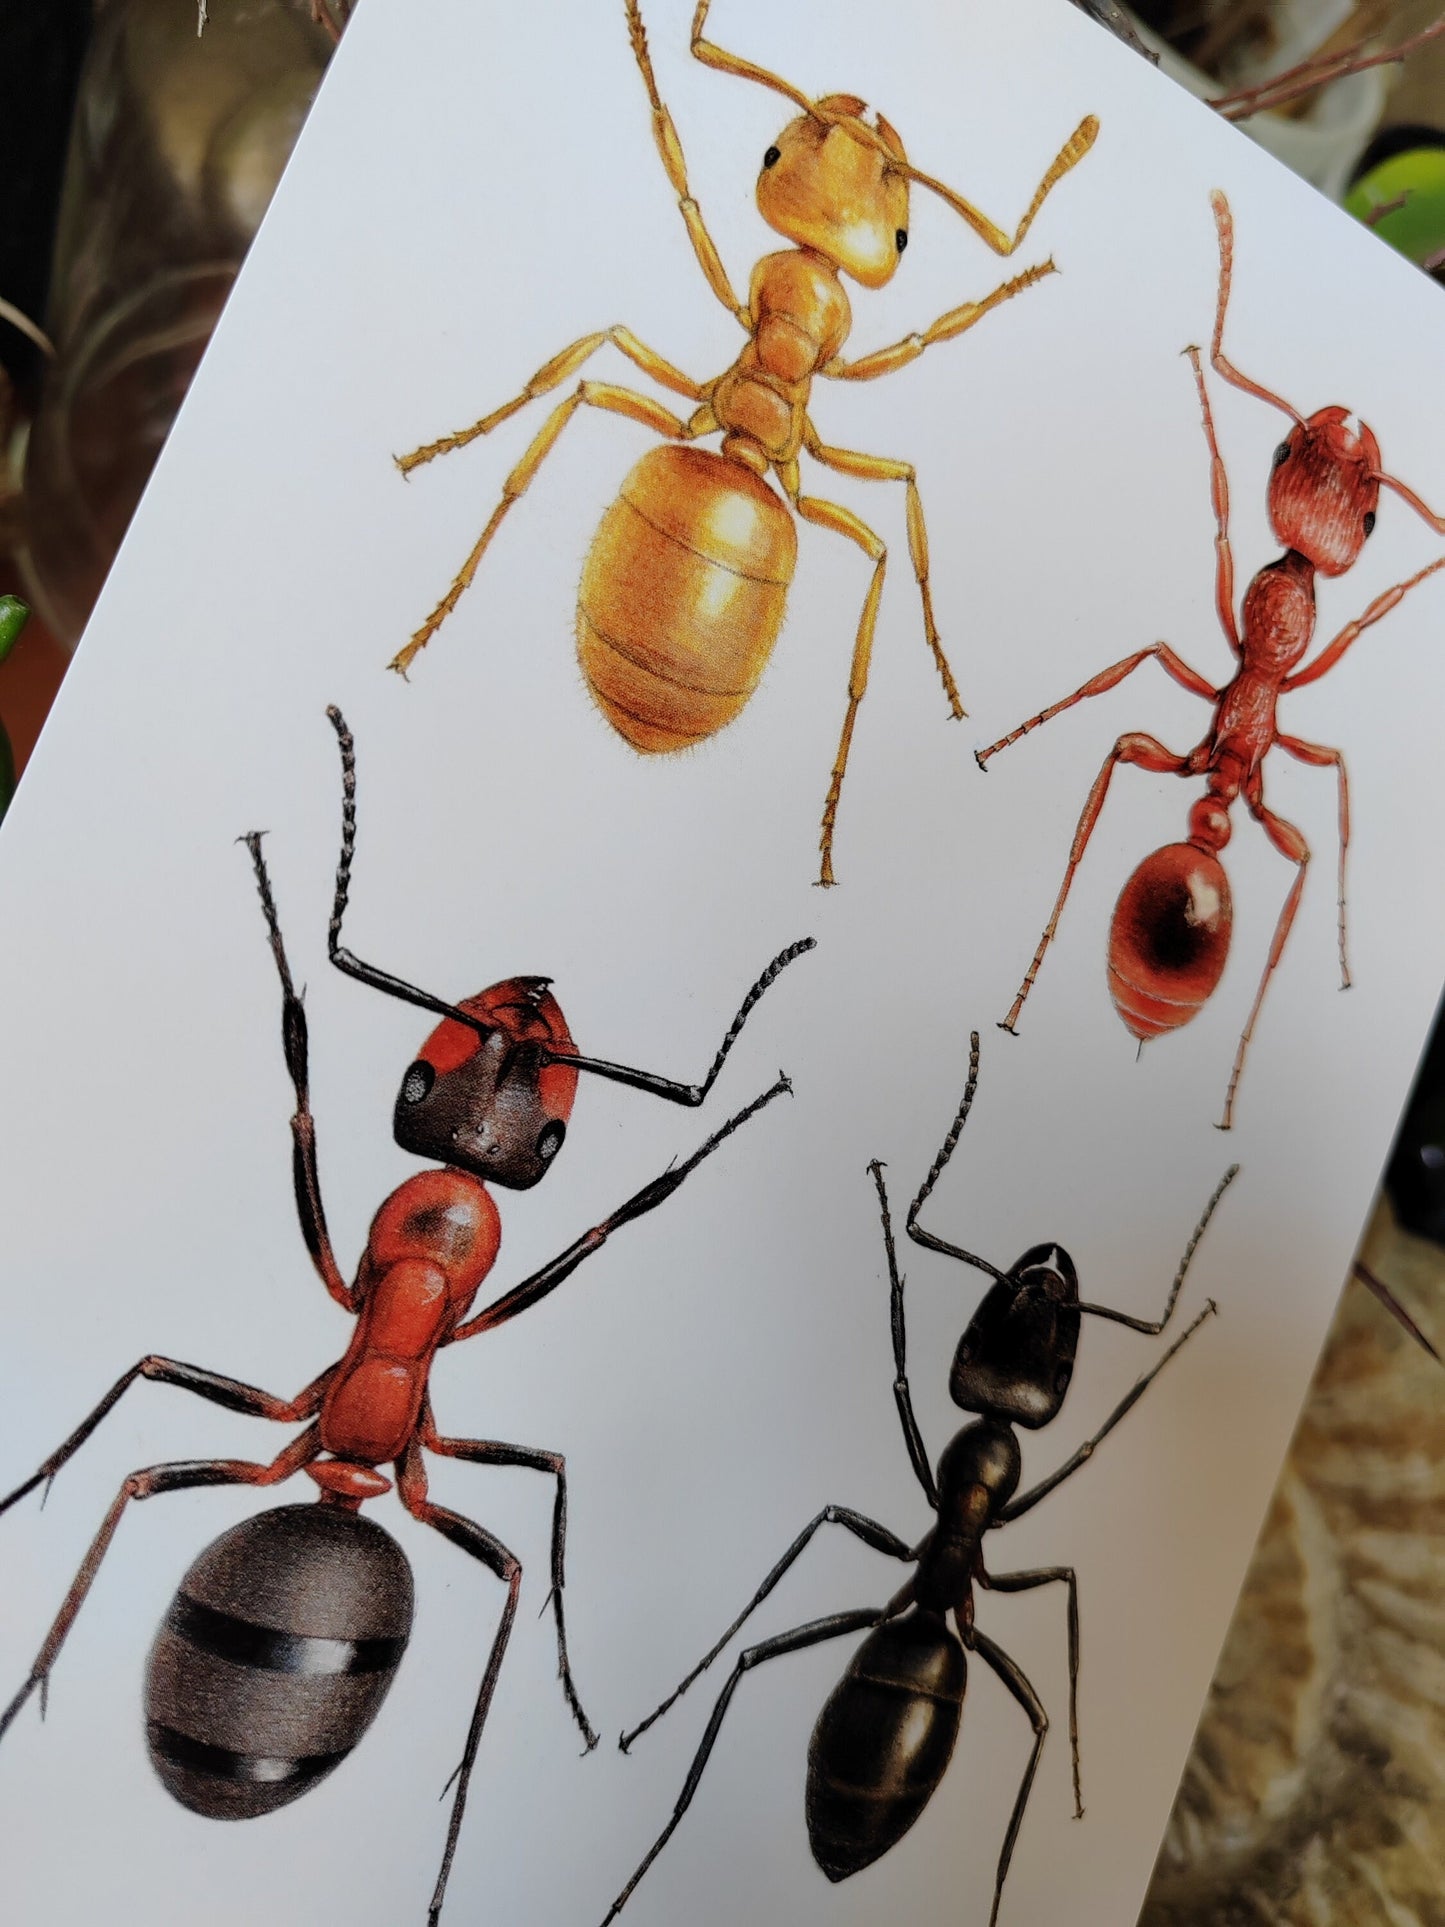 A5 size giant postcard - British Ants